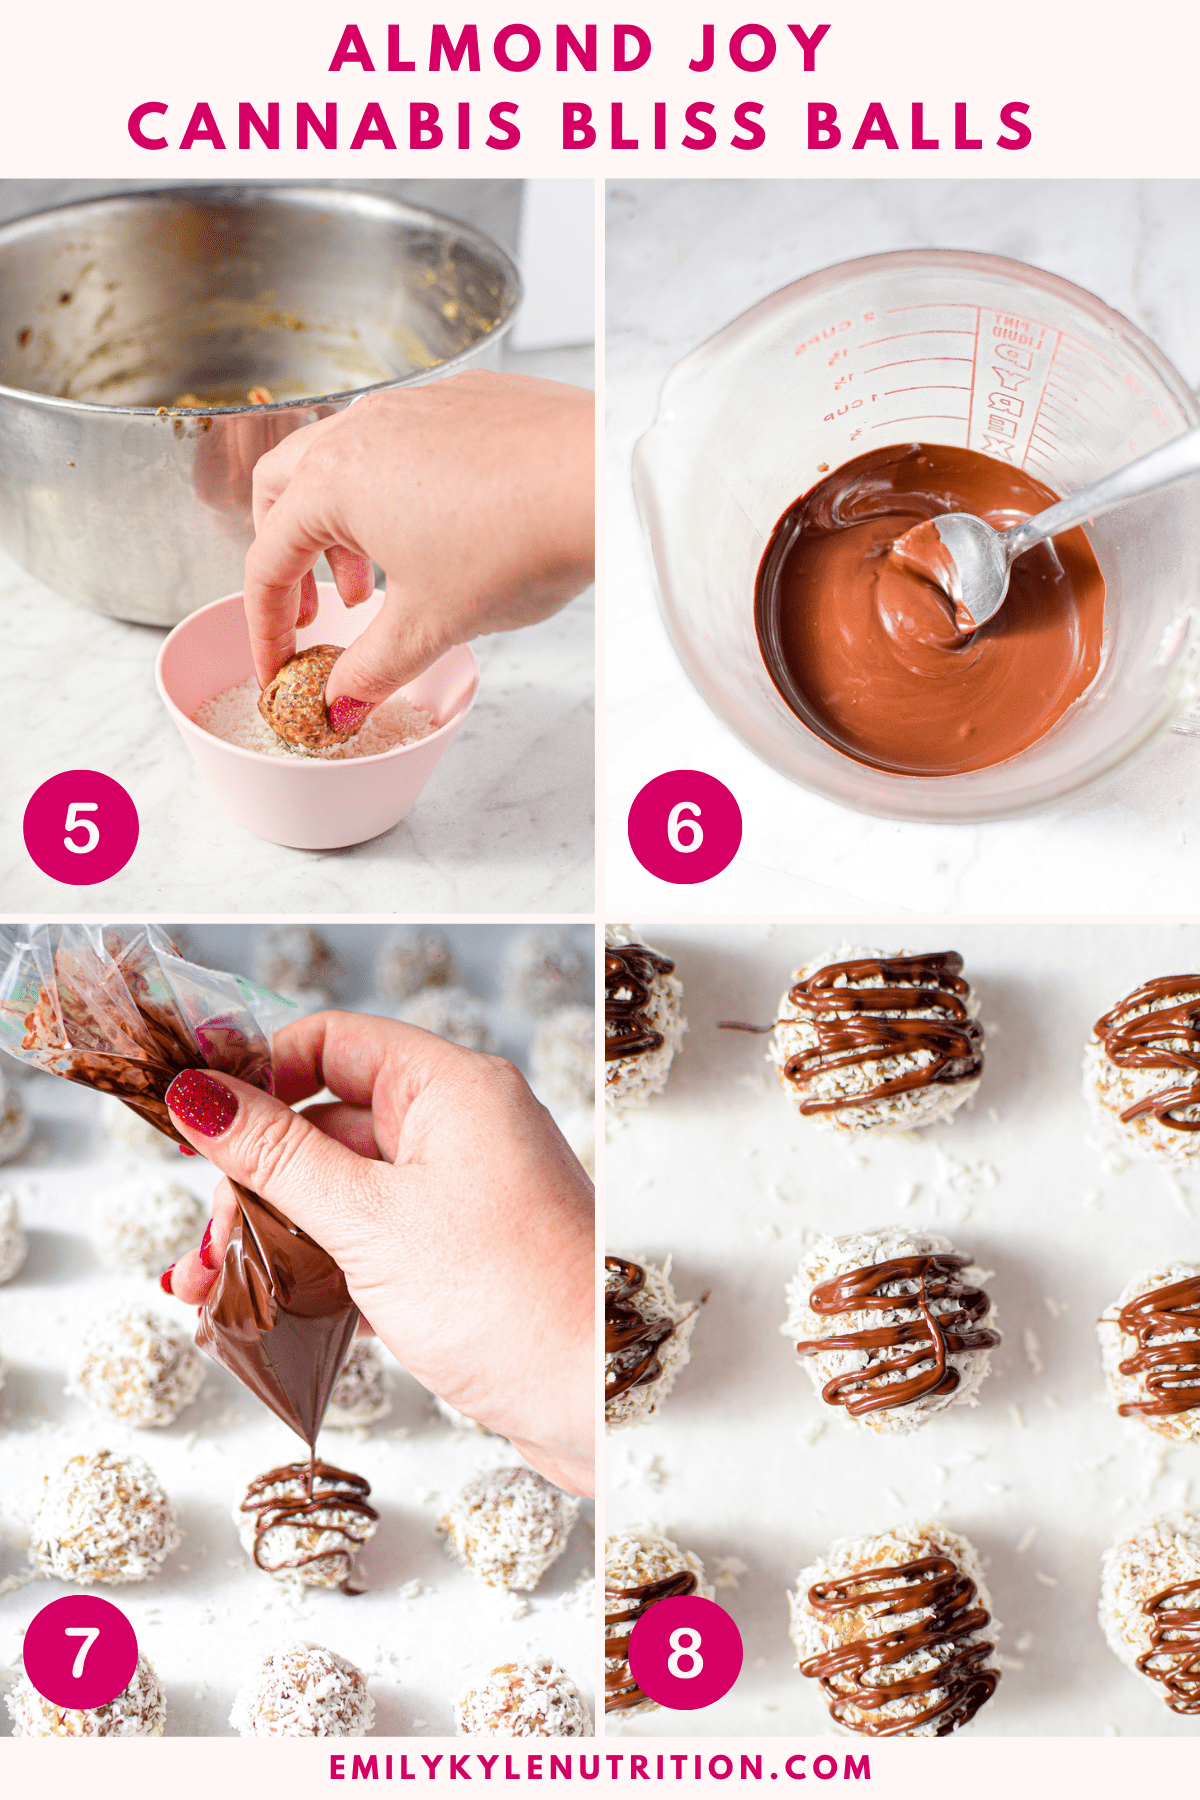 A four step image collage showing the final four steps needed to make almond joy cannabis bliss balls including dipping the balls in coconut flakes, melting the chocolate, drizzling the chocolate over the balls, and the final prepared item. 